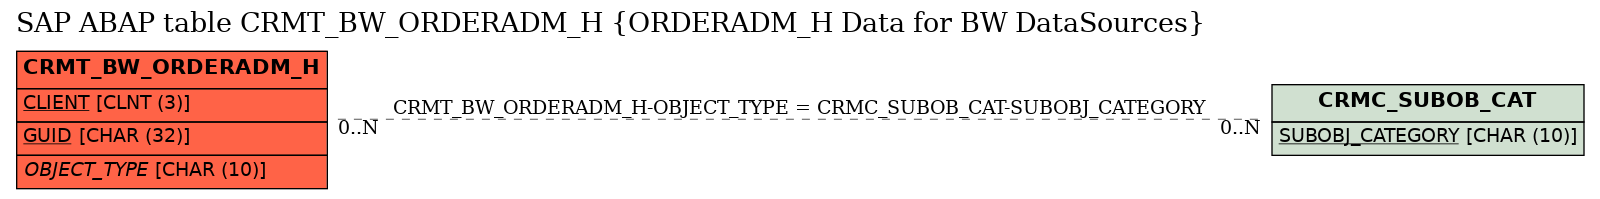 E-R Diagram for table CRMT_BW_ORDERADM_H (ORDERADM_H Data for BW DataSources)